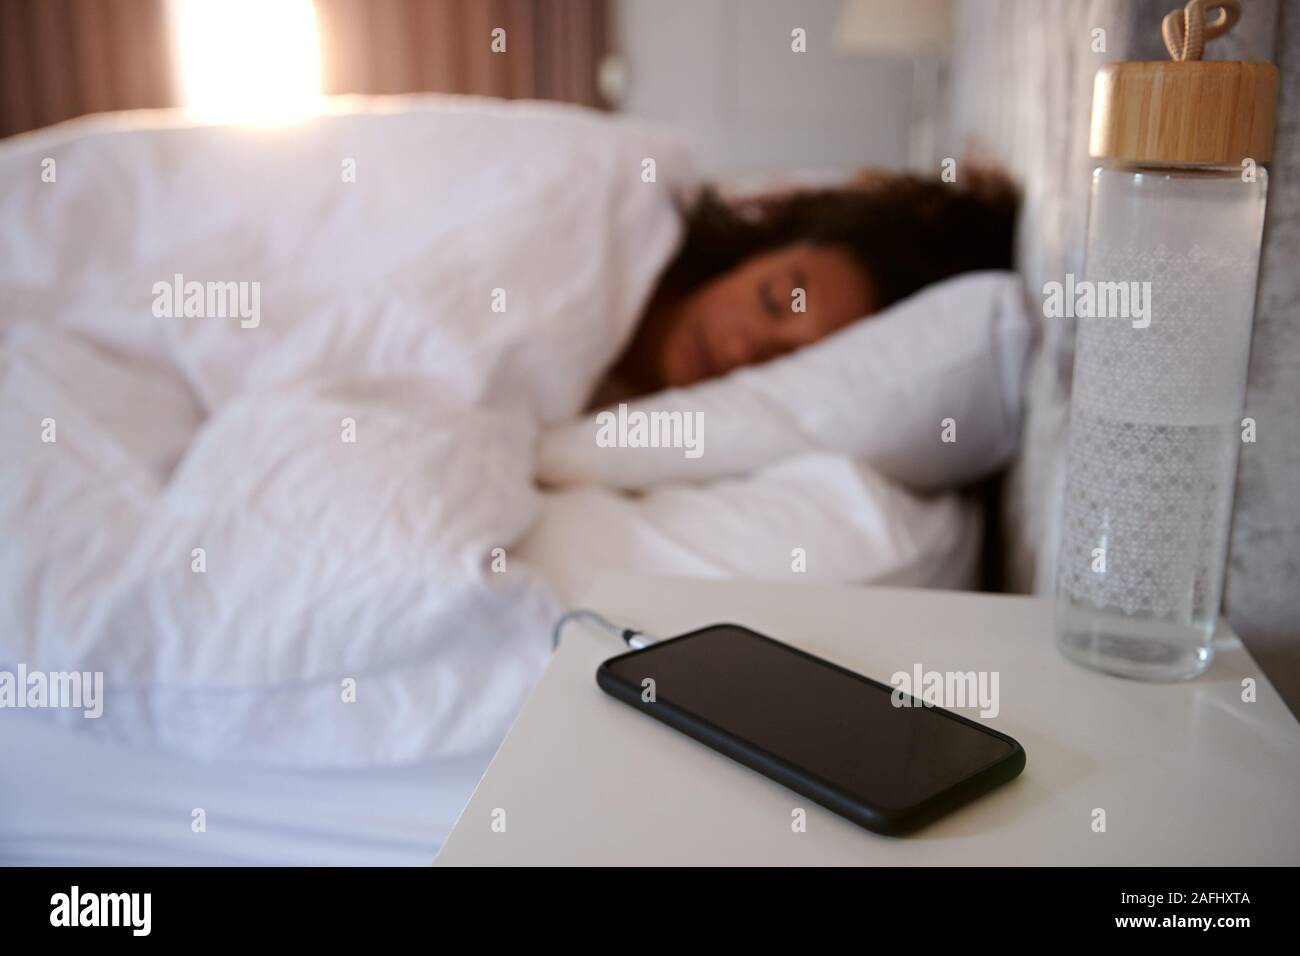 Woman Asleep In Bed With Mobile Phone On Bedside Table Stock Photo